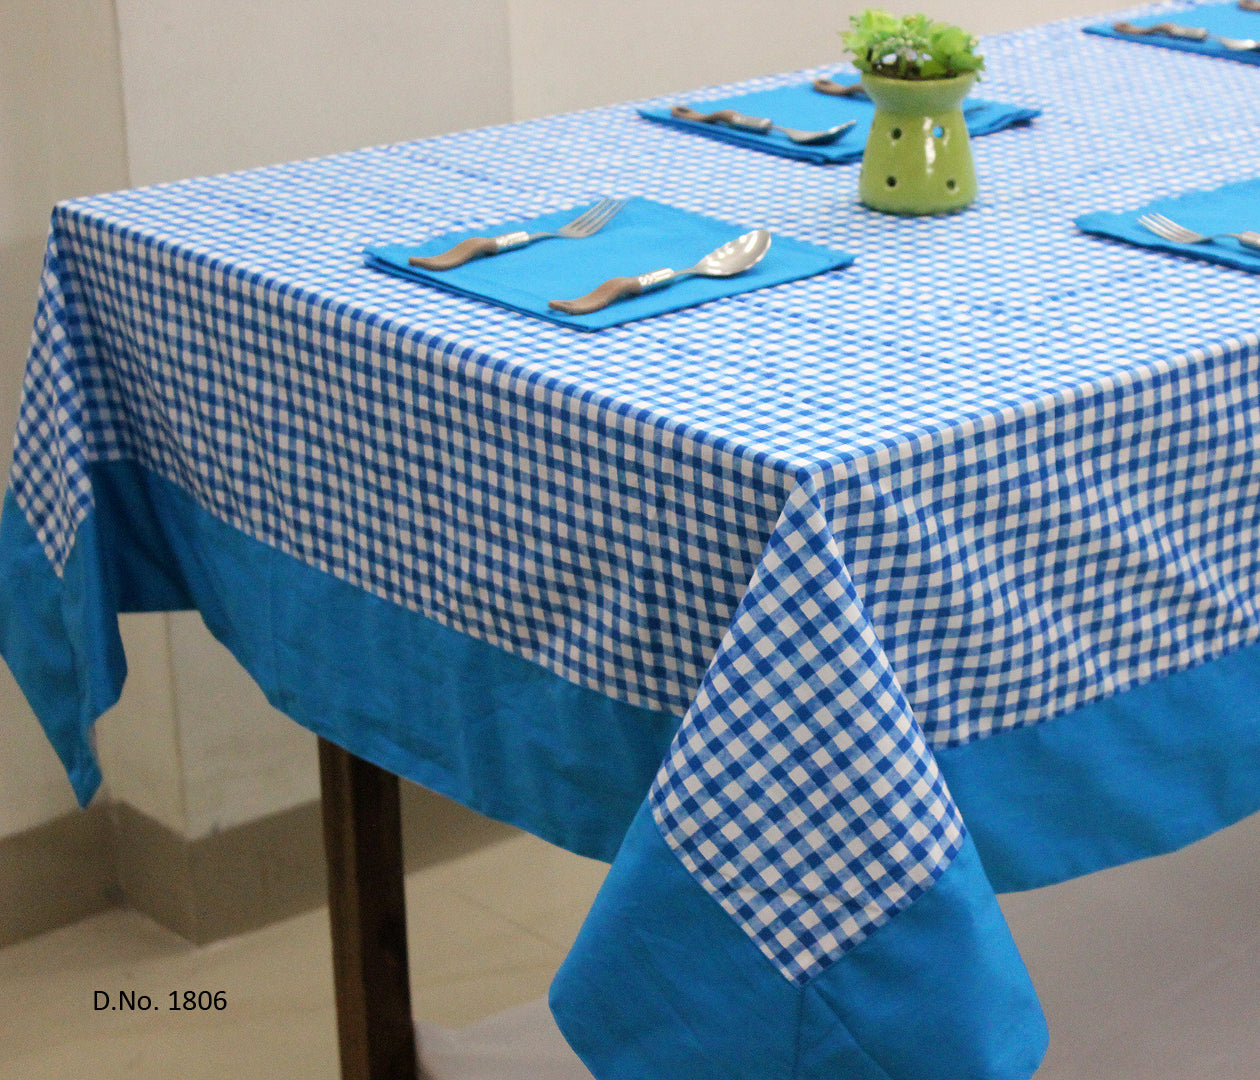 MARVEL Printed Cotton Check 1 Pc Table Cover - Blue